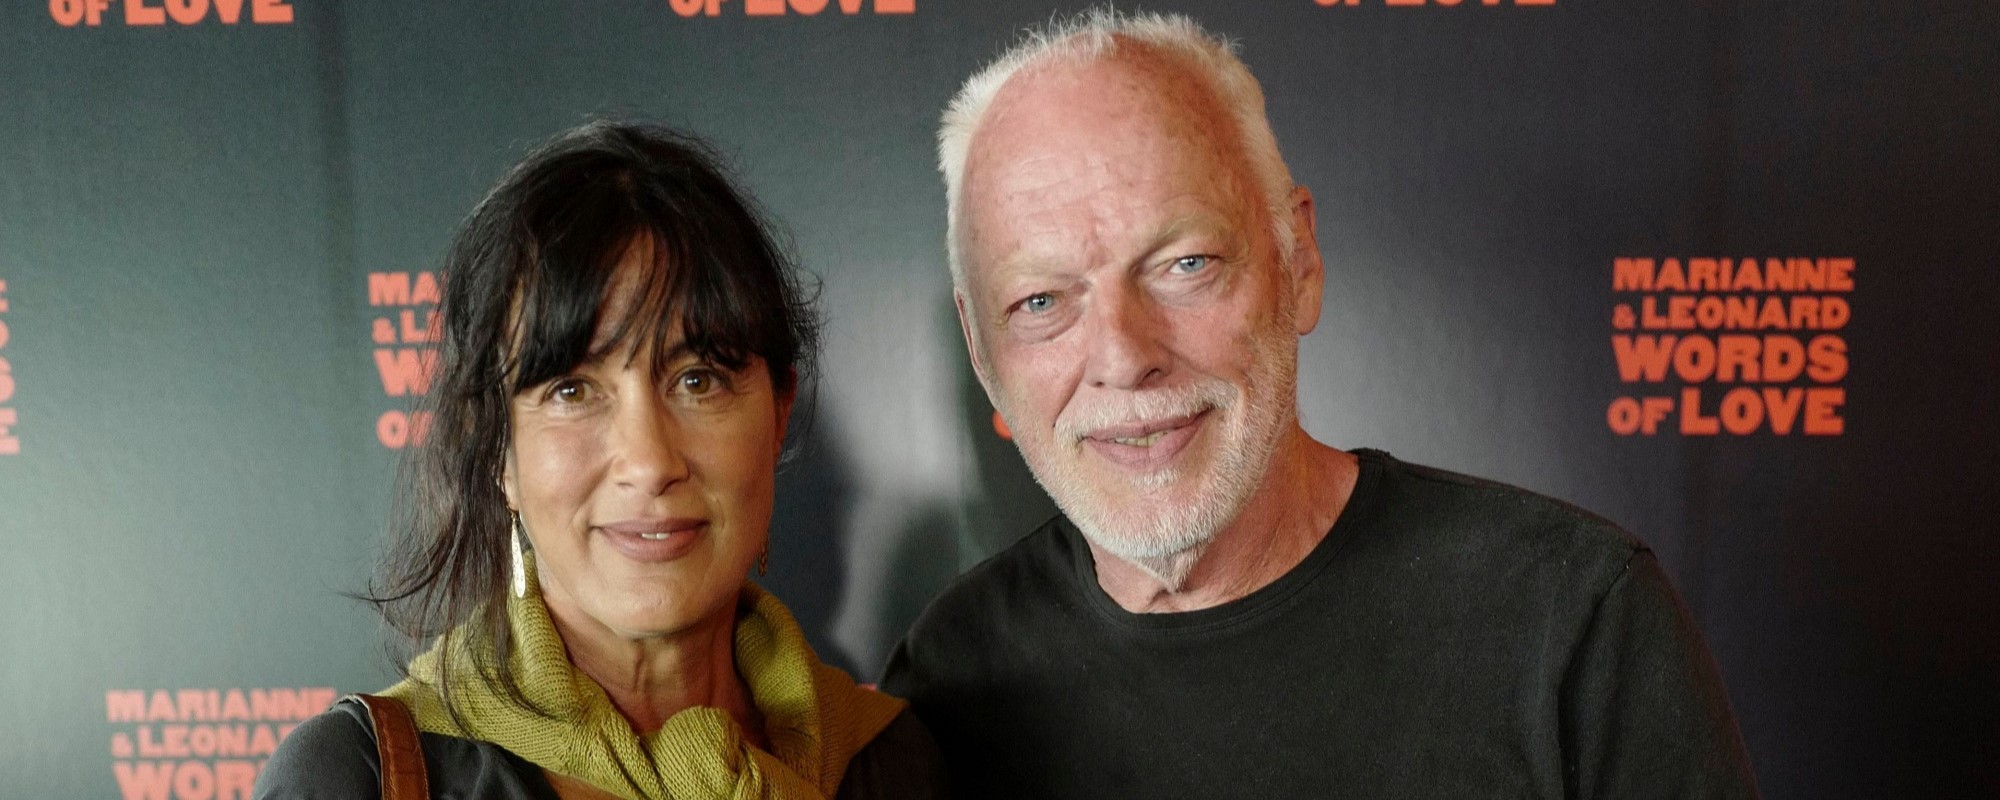 Pink Floyd Guitarist David Gilmour and Wife Polly Samson Celebrate Their 30th Anniversary with Sweet Throwback Photos